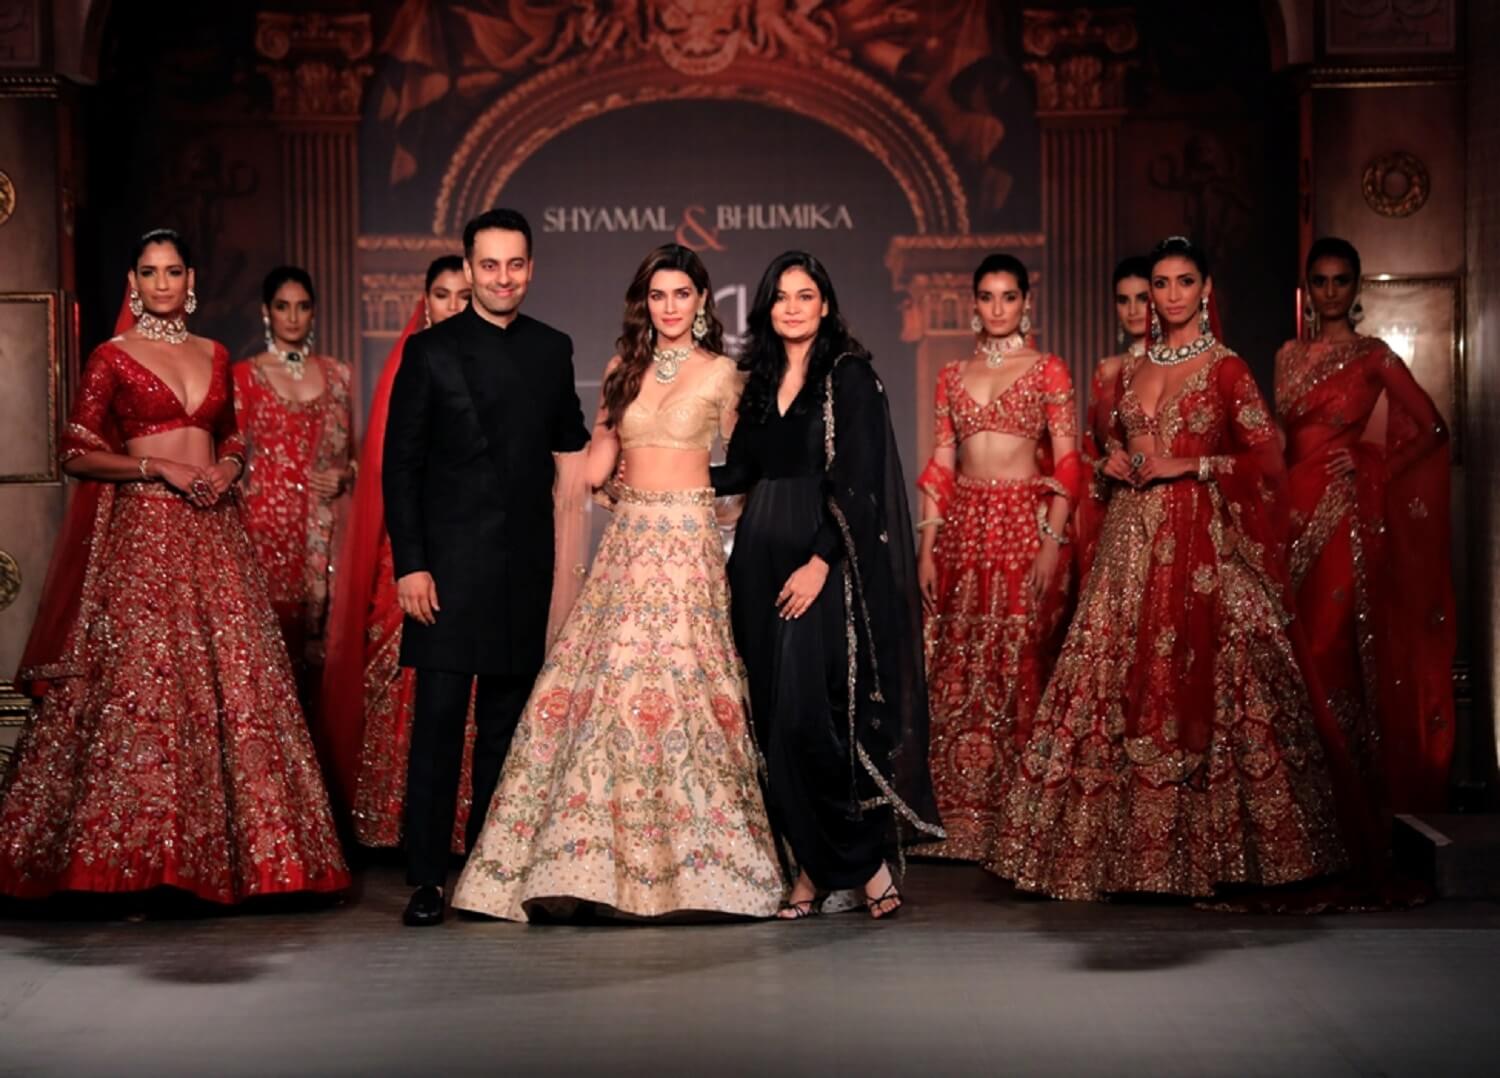 Designer duo Shyamal and Bhumika bring India to the world with their latest  wedding collection